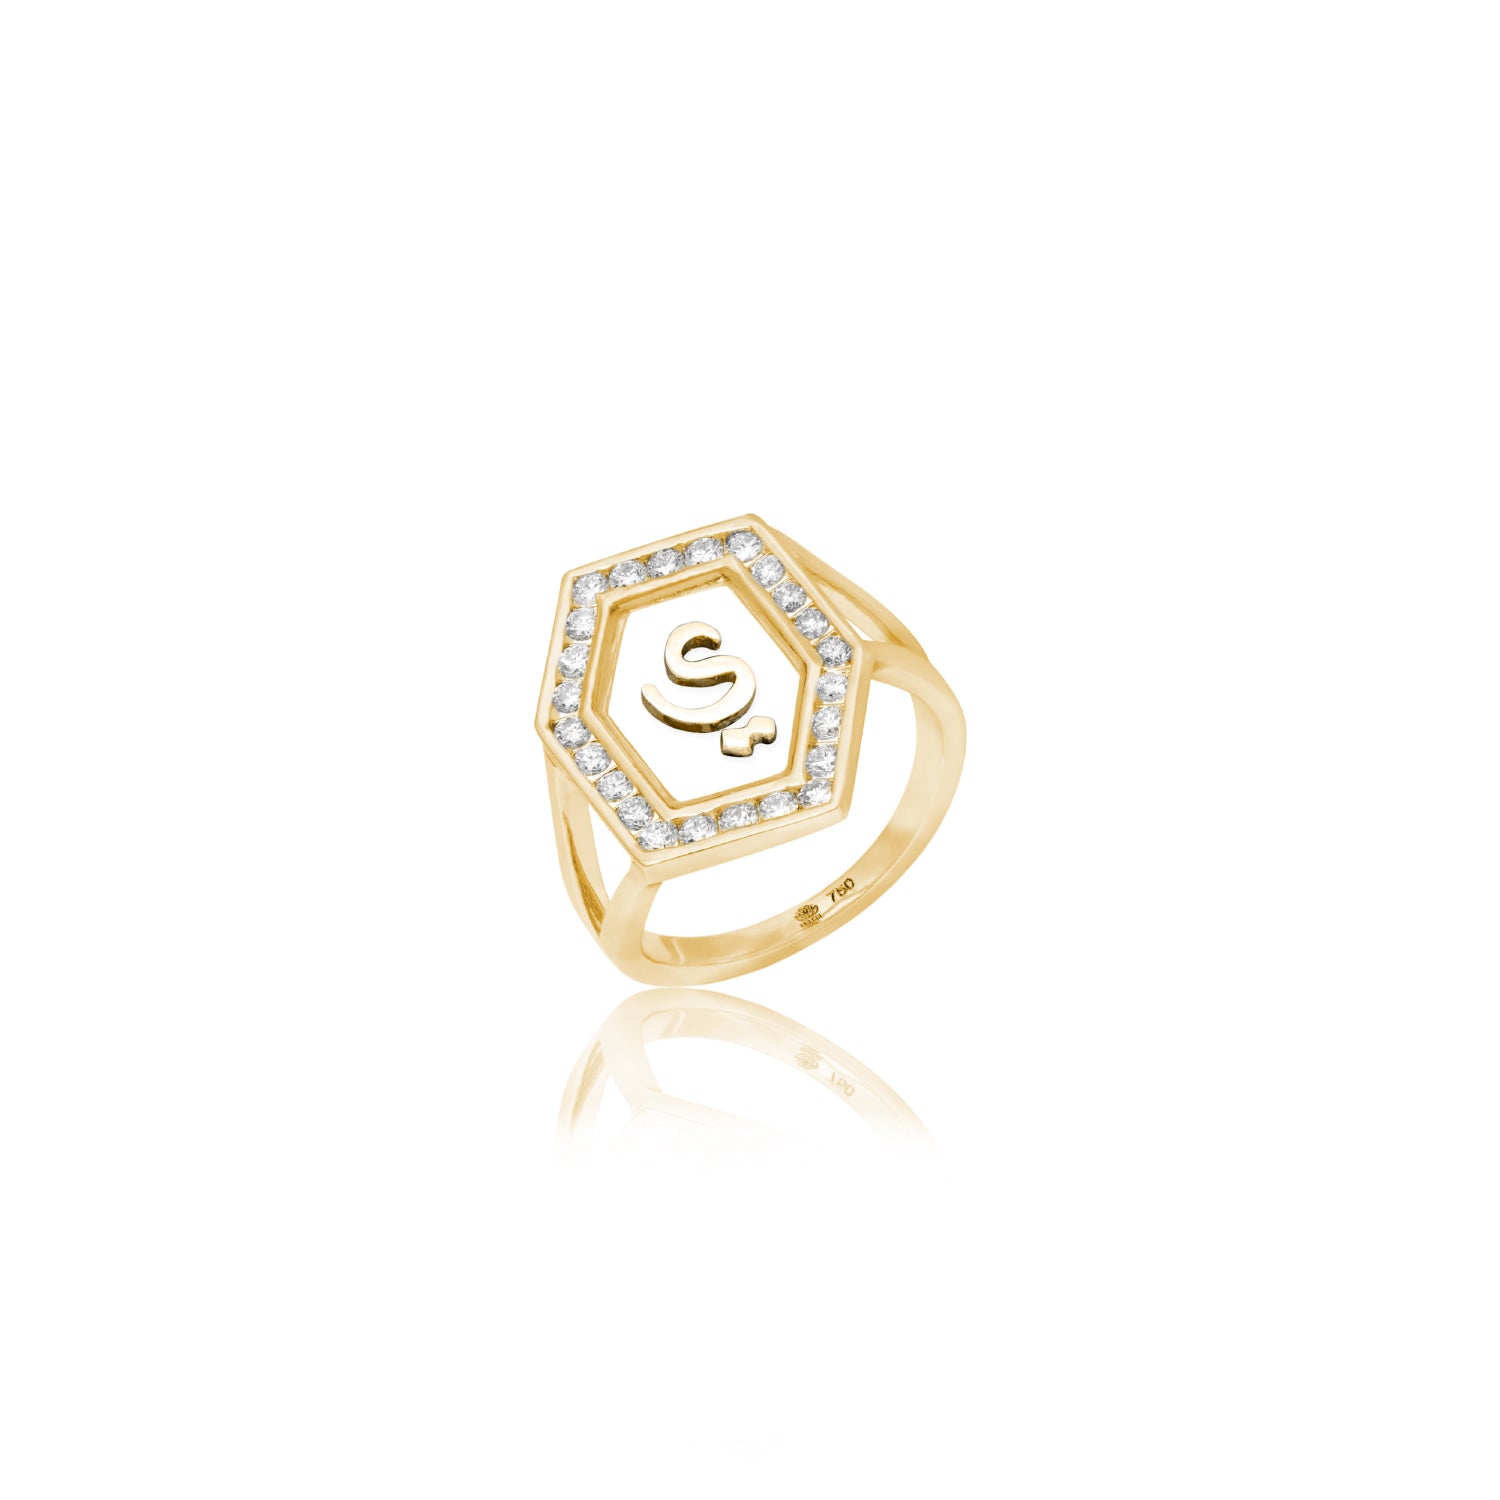 Qamoos 1.0 Letter ي Diamond Ring in Yellow Gold